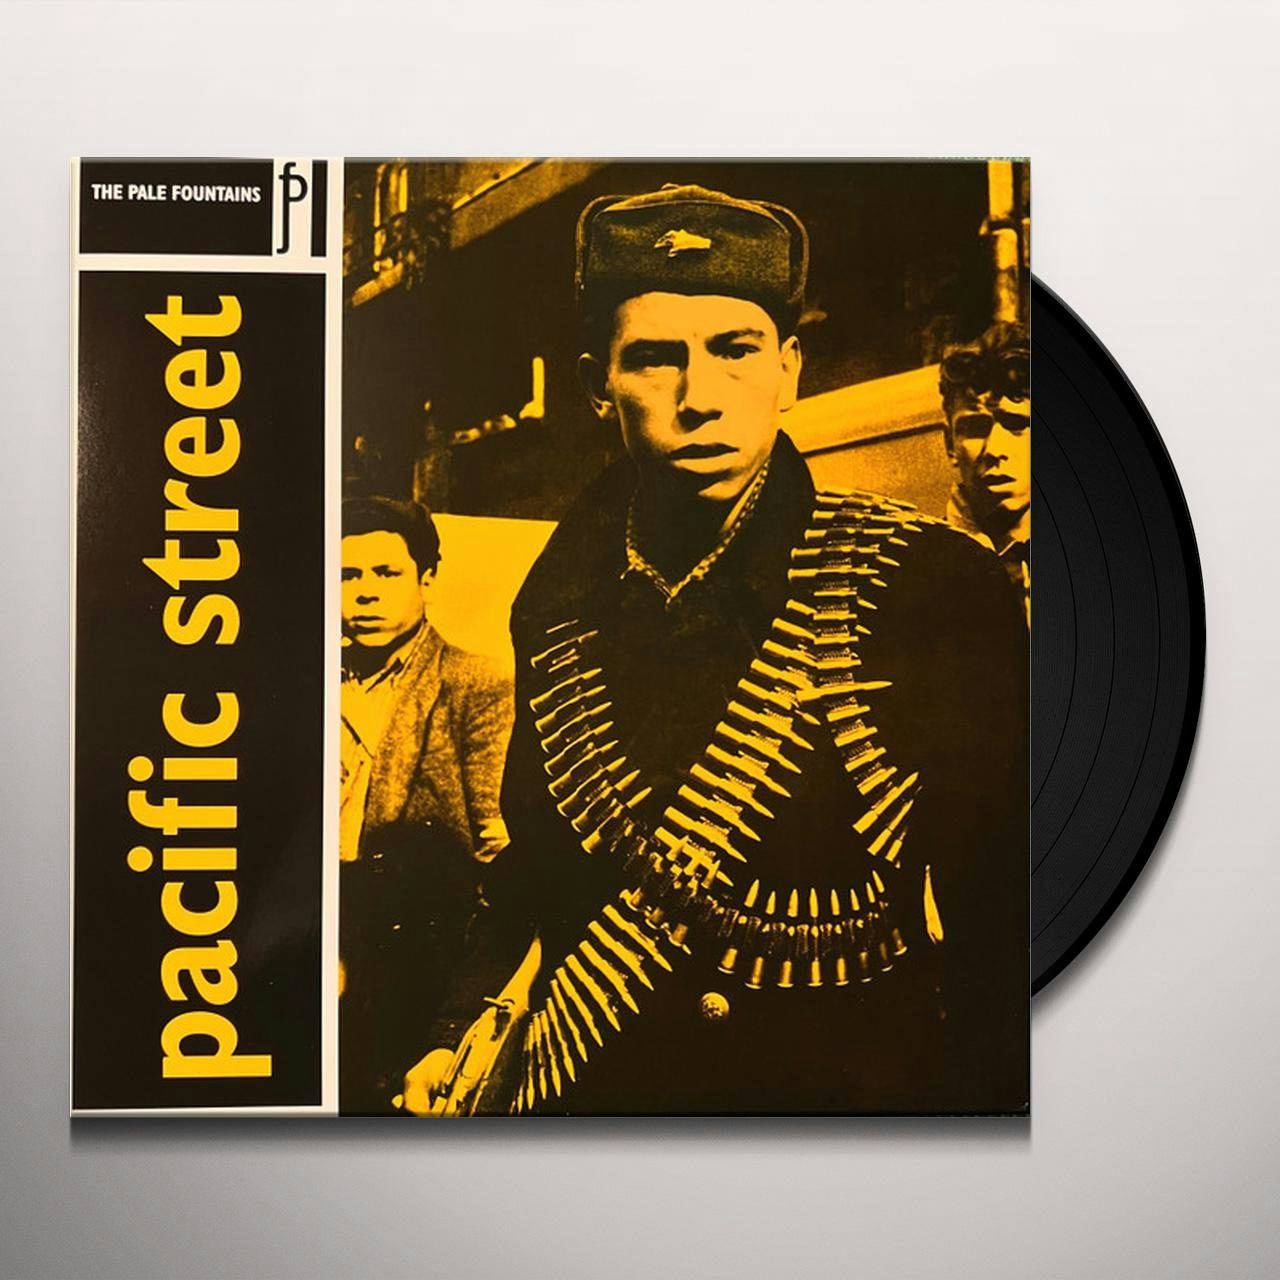 The Pale Fountains Store: Official Merch & Vinyl